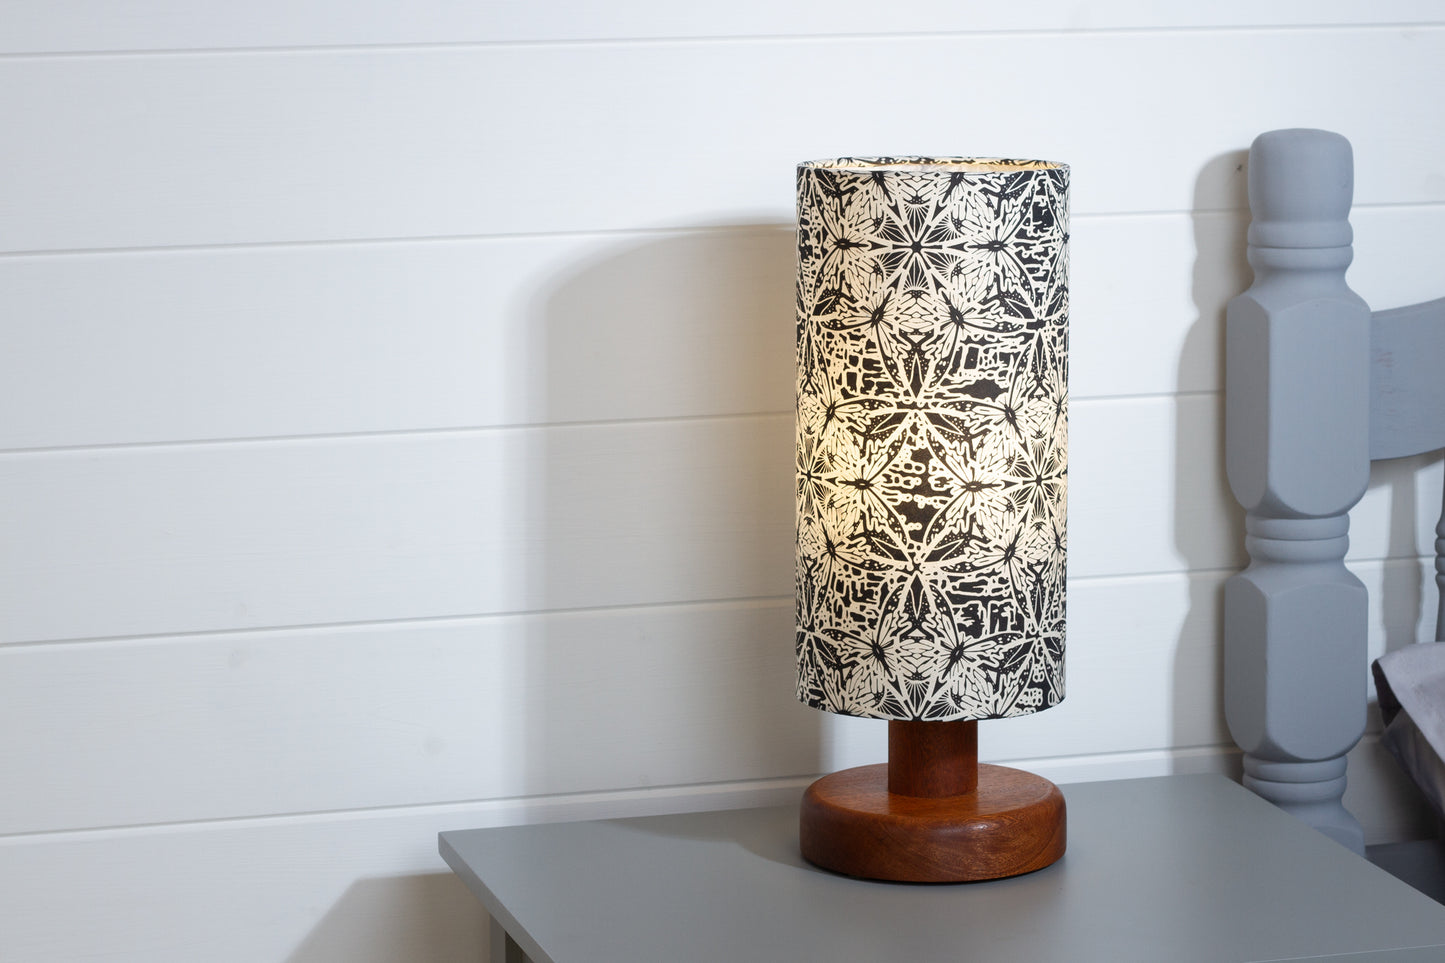 Round Sapele Table Lamp (15cm) with 15cm x 30cm Drum Lampshade in B136 ~ Butterfly Kaleidoscope Black